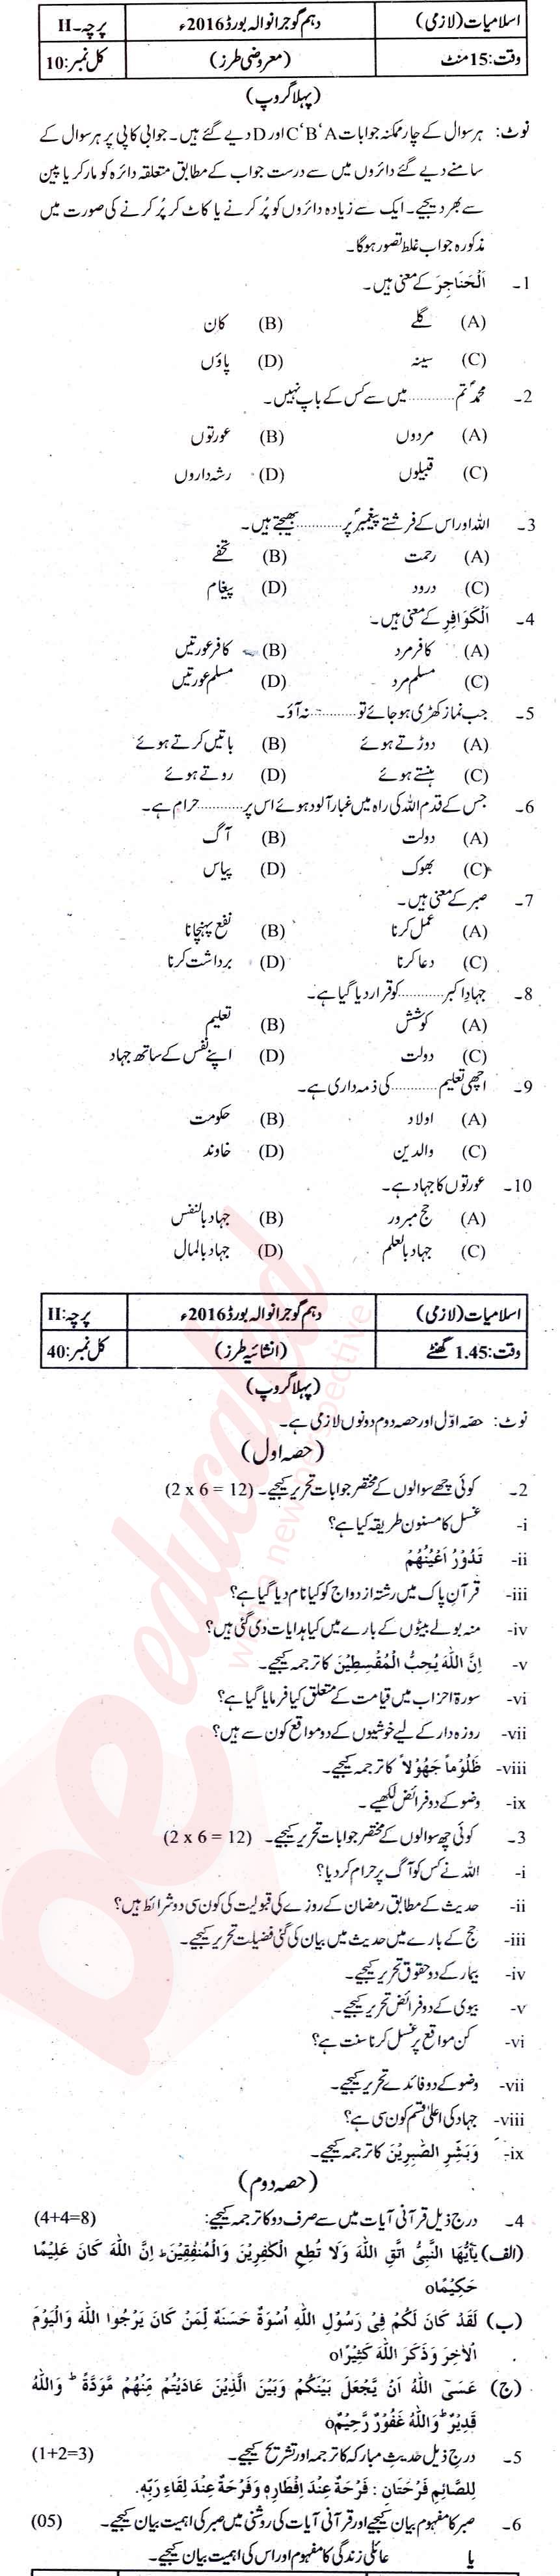 Islamiat (Compulsory) 10th class Past Paper Group 1 BISE Gujranwala 2016